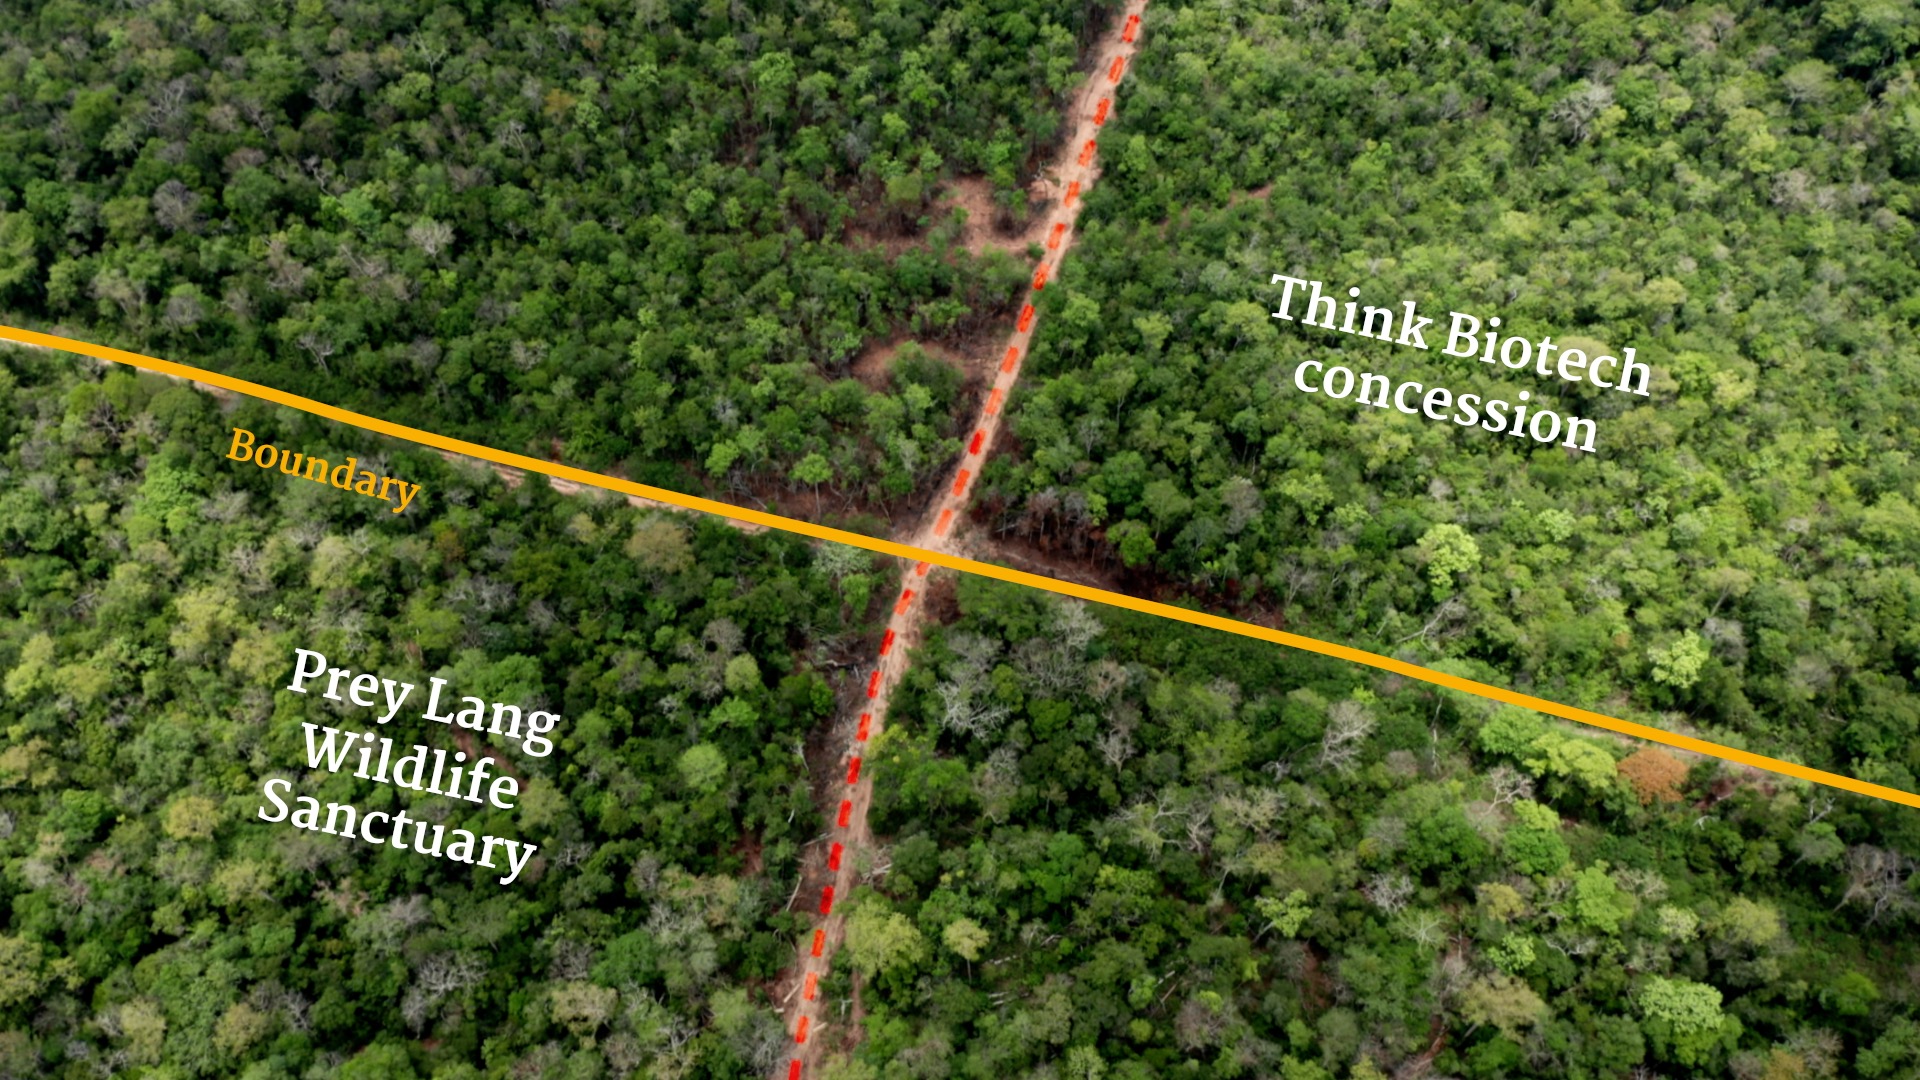 Initially identified on satellite imagery, the new road crossing the boundary of Prey Lang Wildlife Sanctuary was built from within Think Biotech's concession over the course of April 2023. Image by Chasing Deforestation / Mongabay.